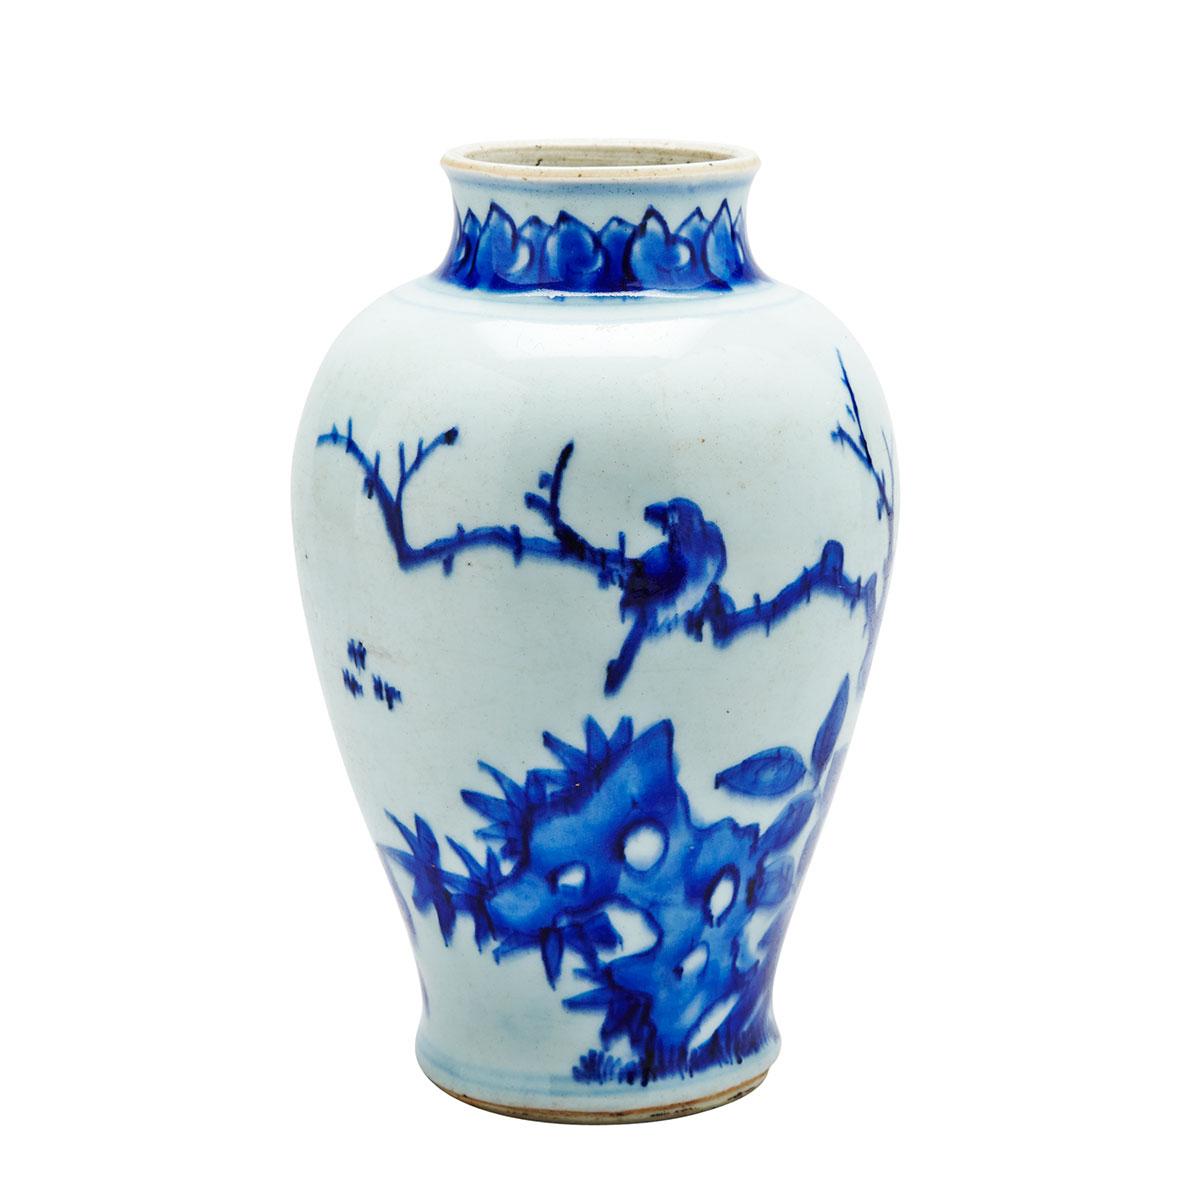 Blue and White Ovoid Jar, Transitional Period, 17th Century